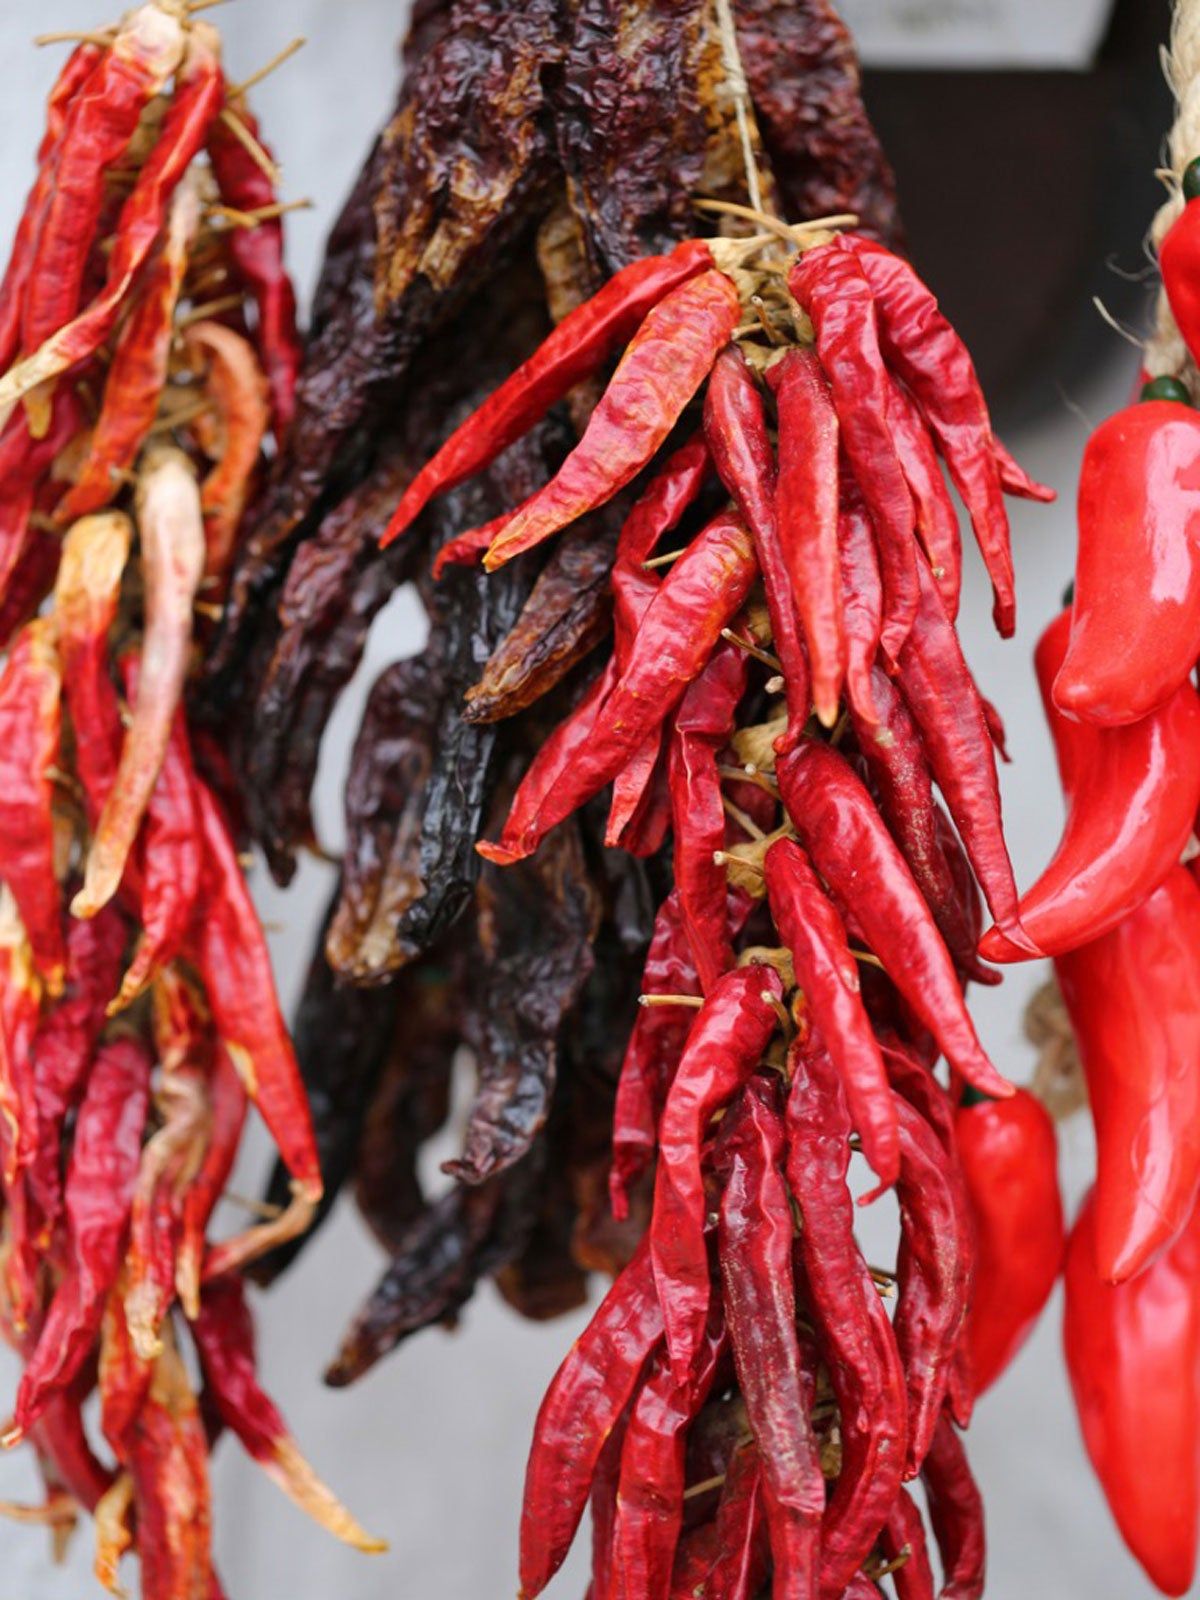 Drying Hot Peppers: Tips On How To Store Peppers